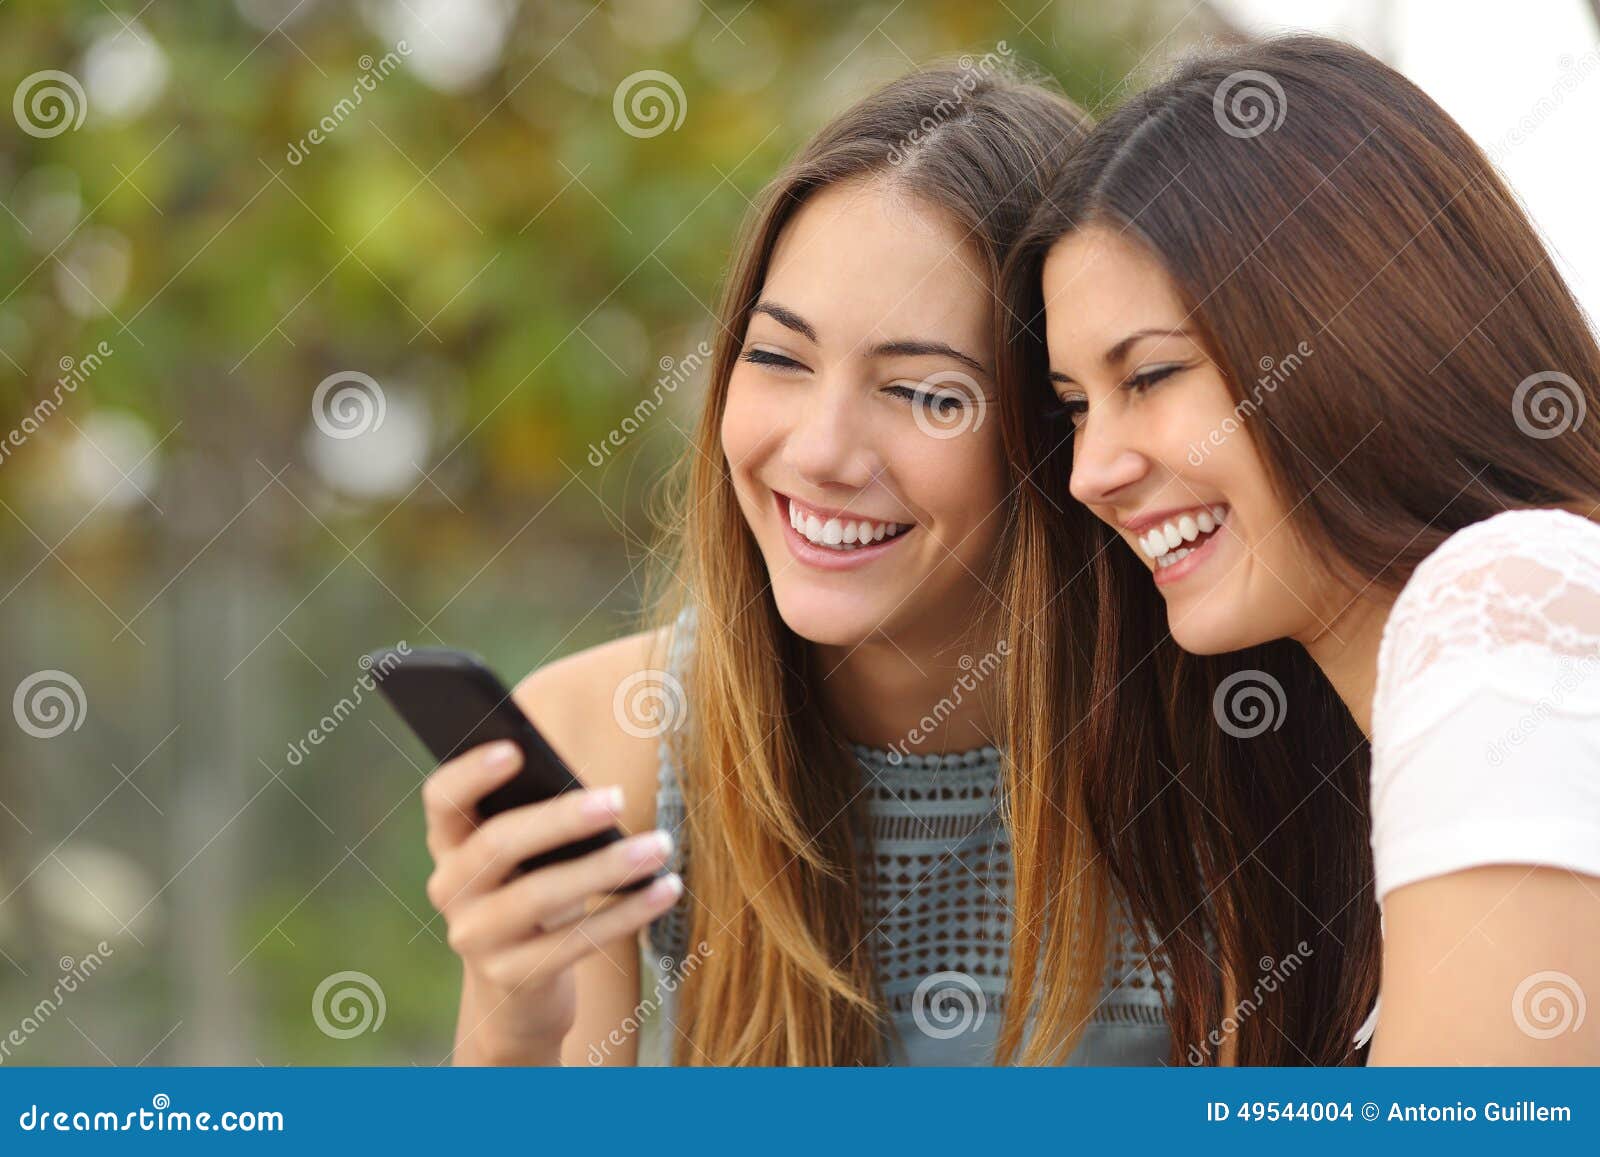 two happy women friends sharing a smart phone